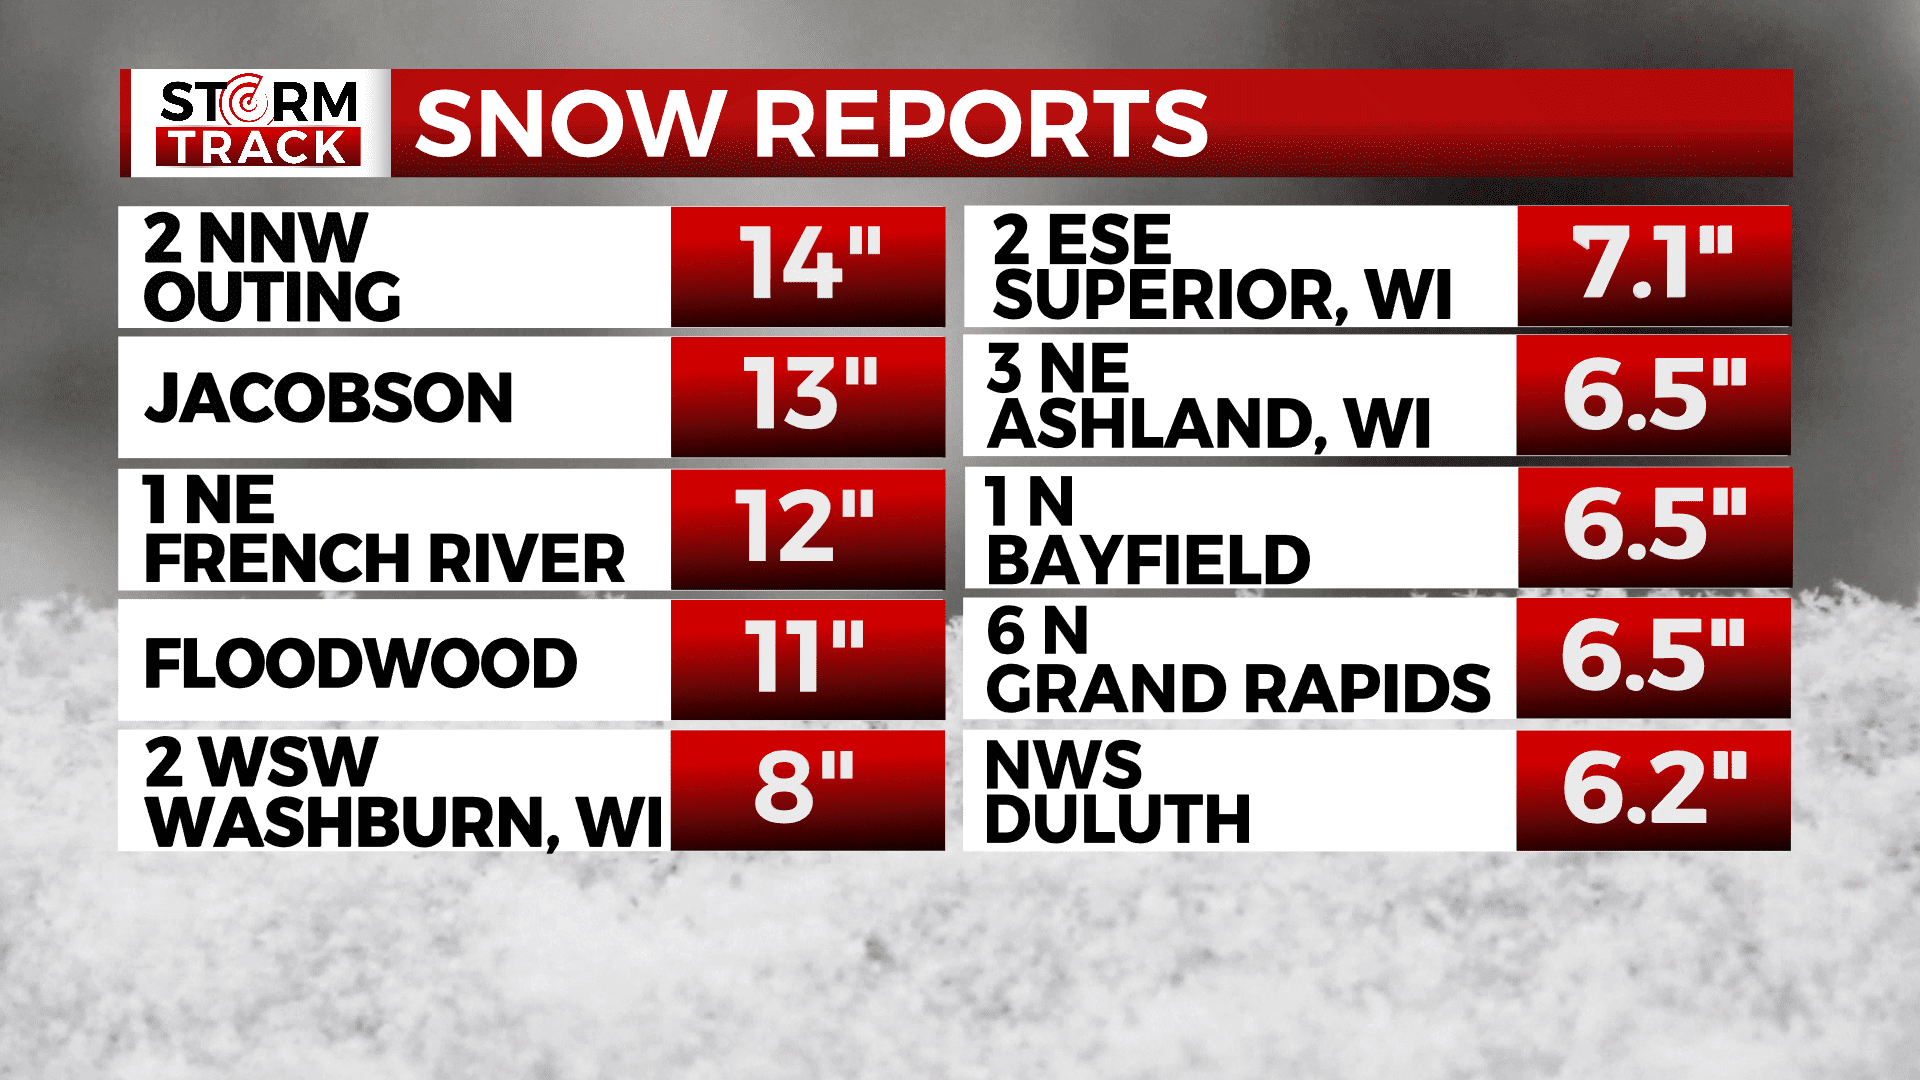 Snow reports from March 1st